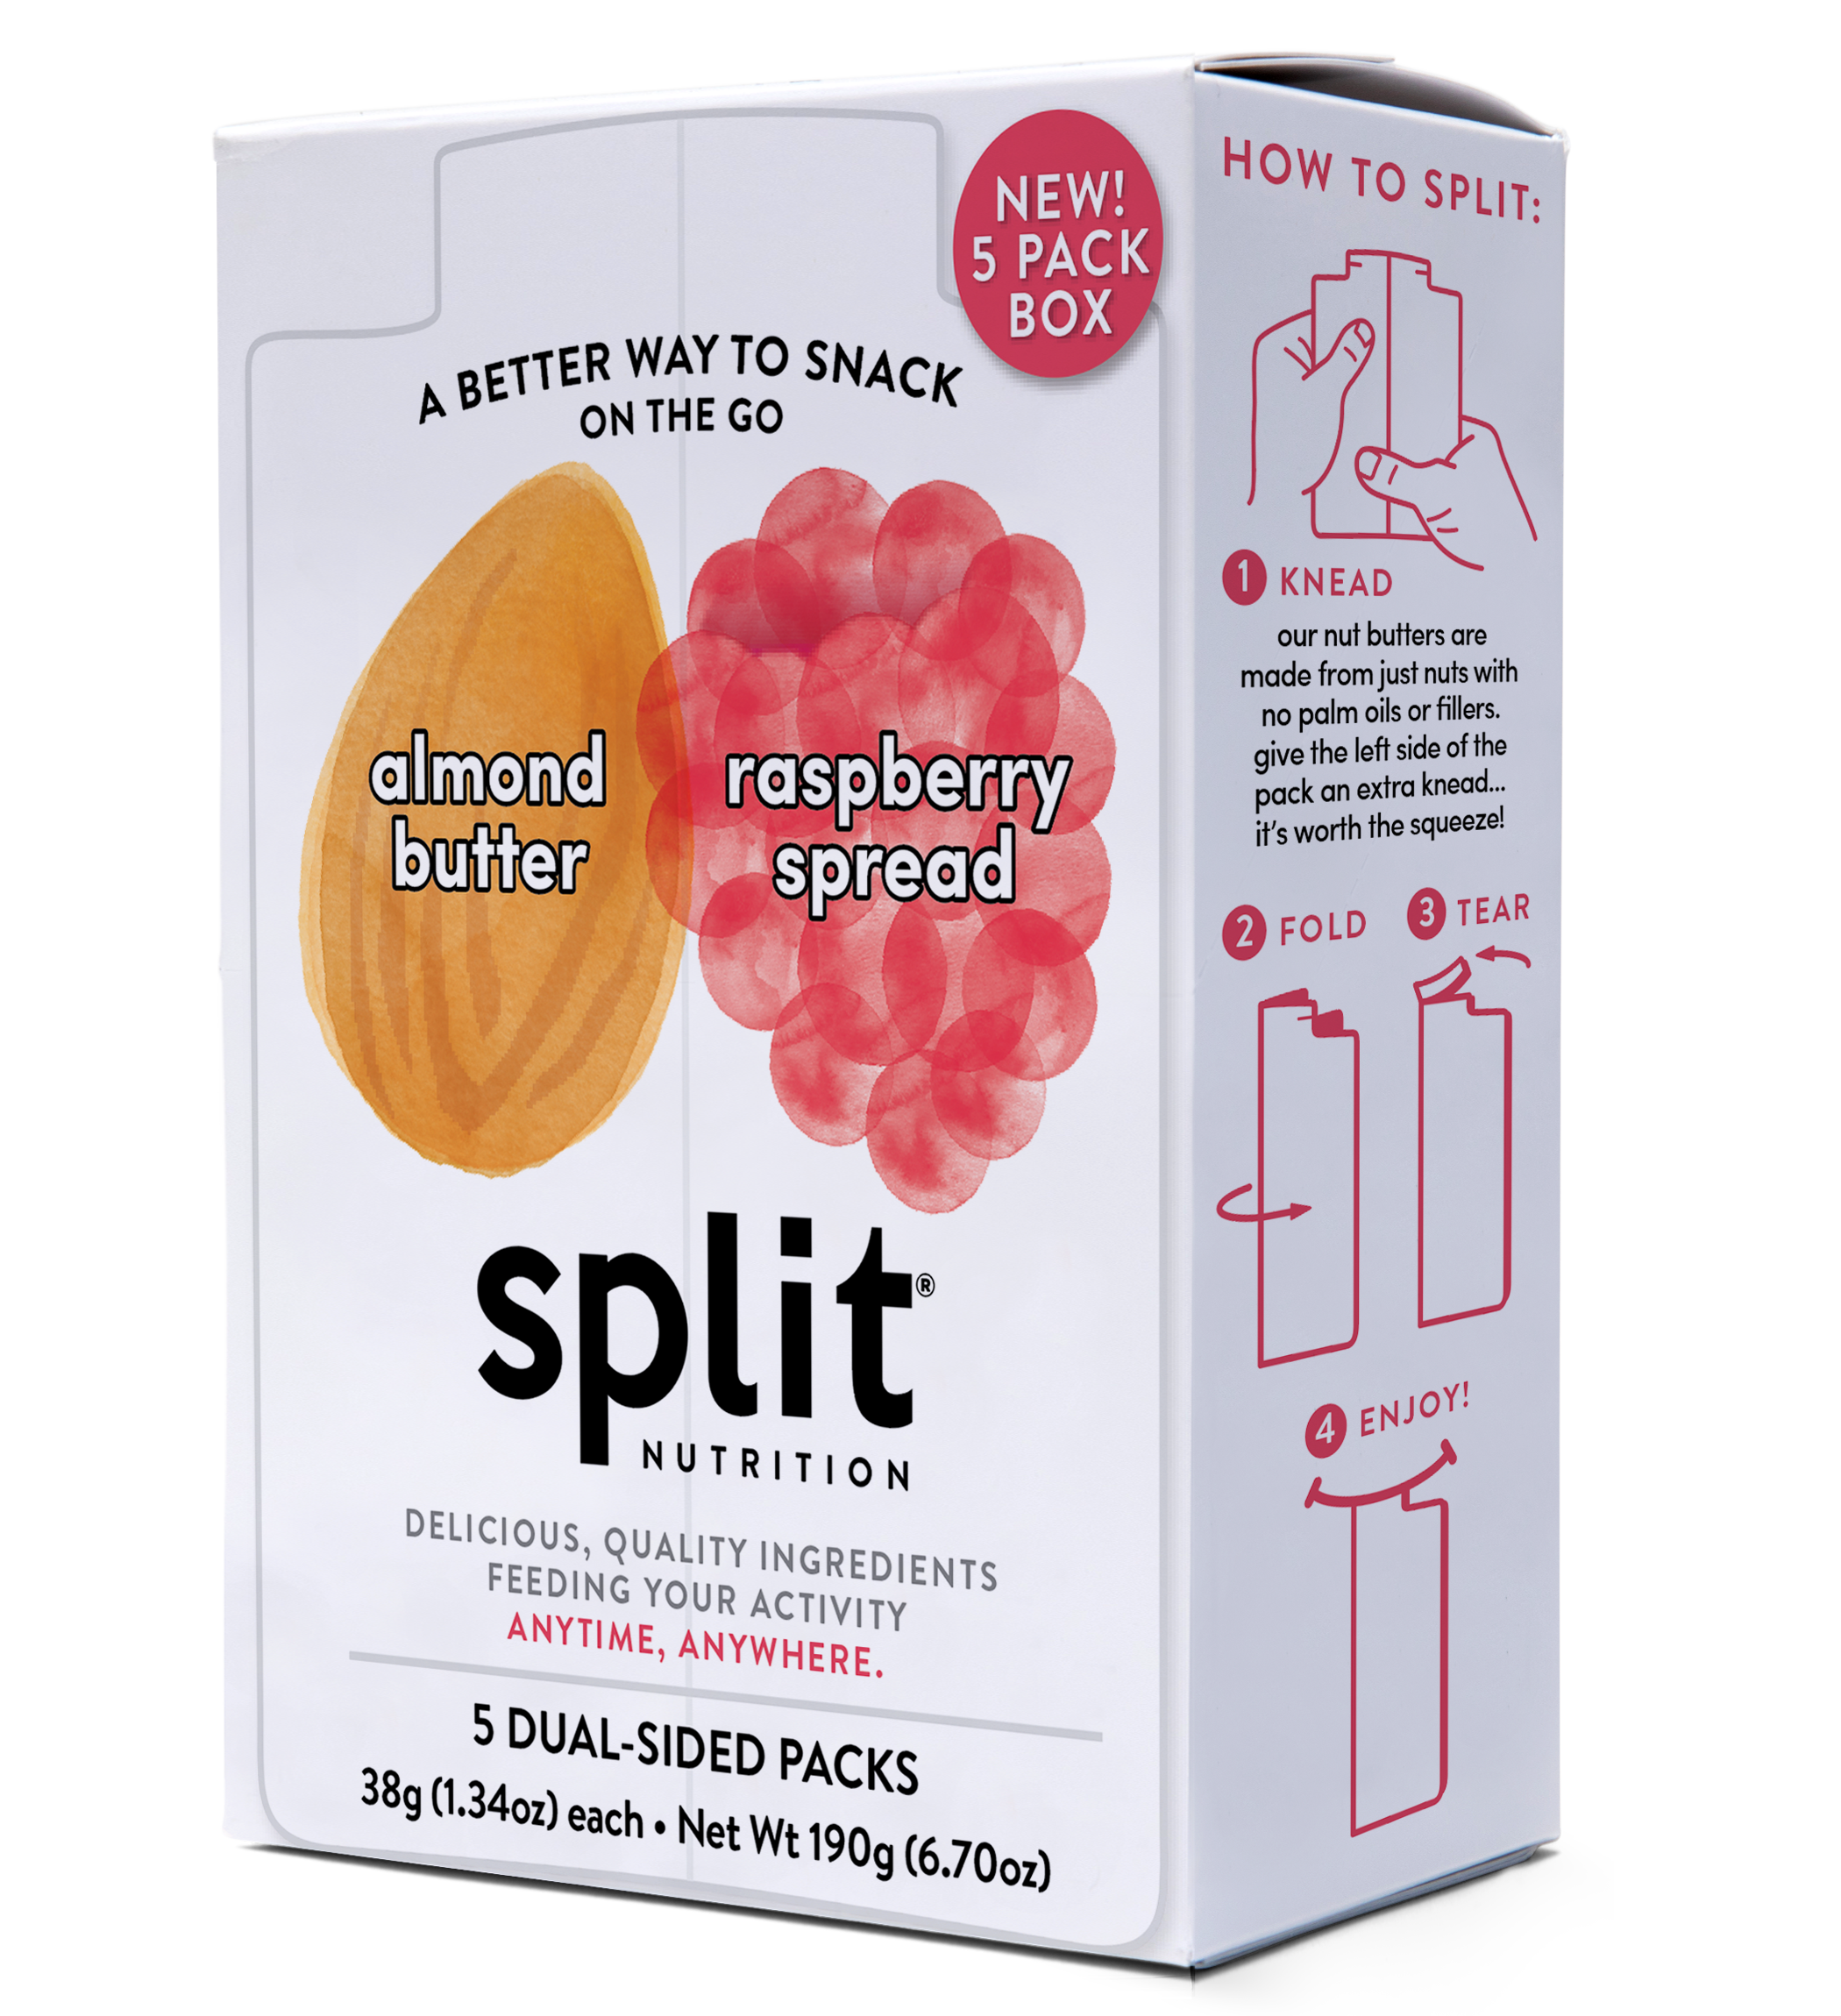 Split Nutrition Almond Butter and Raspberry Fruit Spread (5ct box) 8 innerpacks per case 6.7 oz